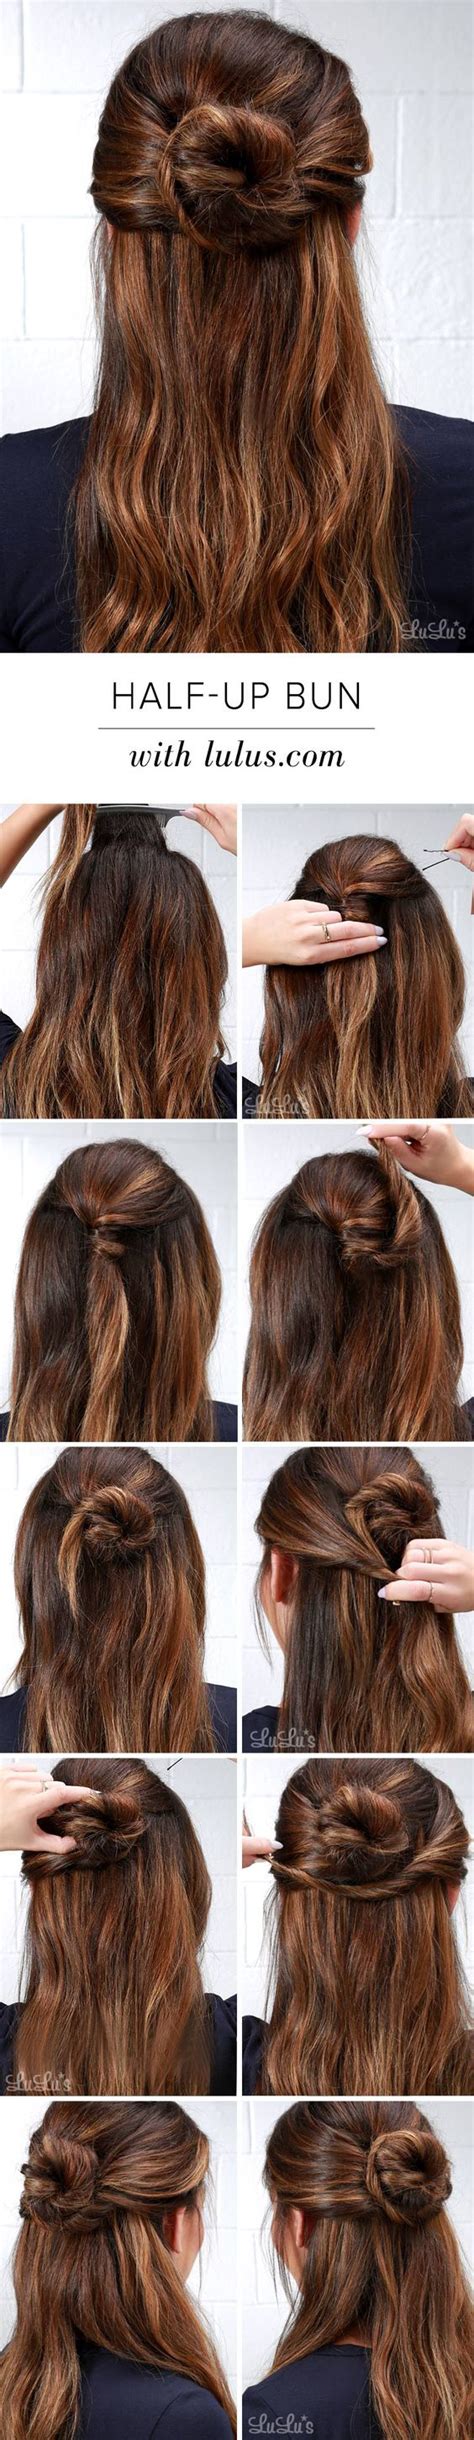 12 Cute And Easy Hairstyles That Can Be Done In A Few Minutes Beauty